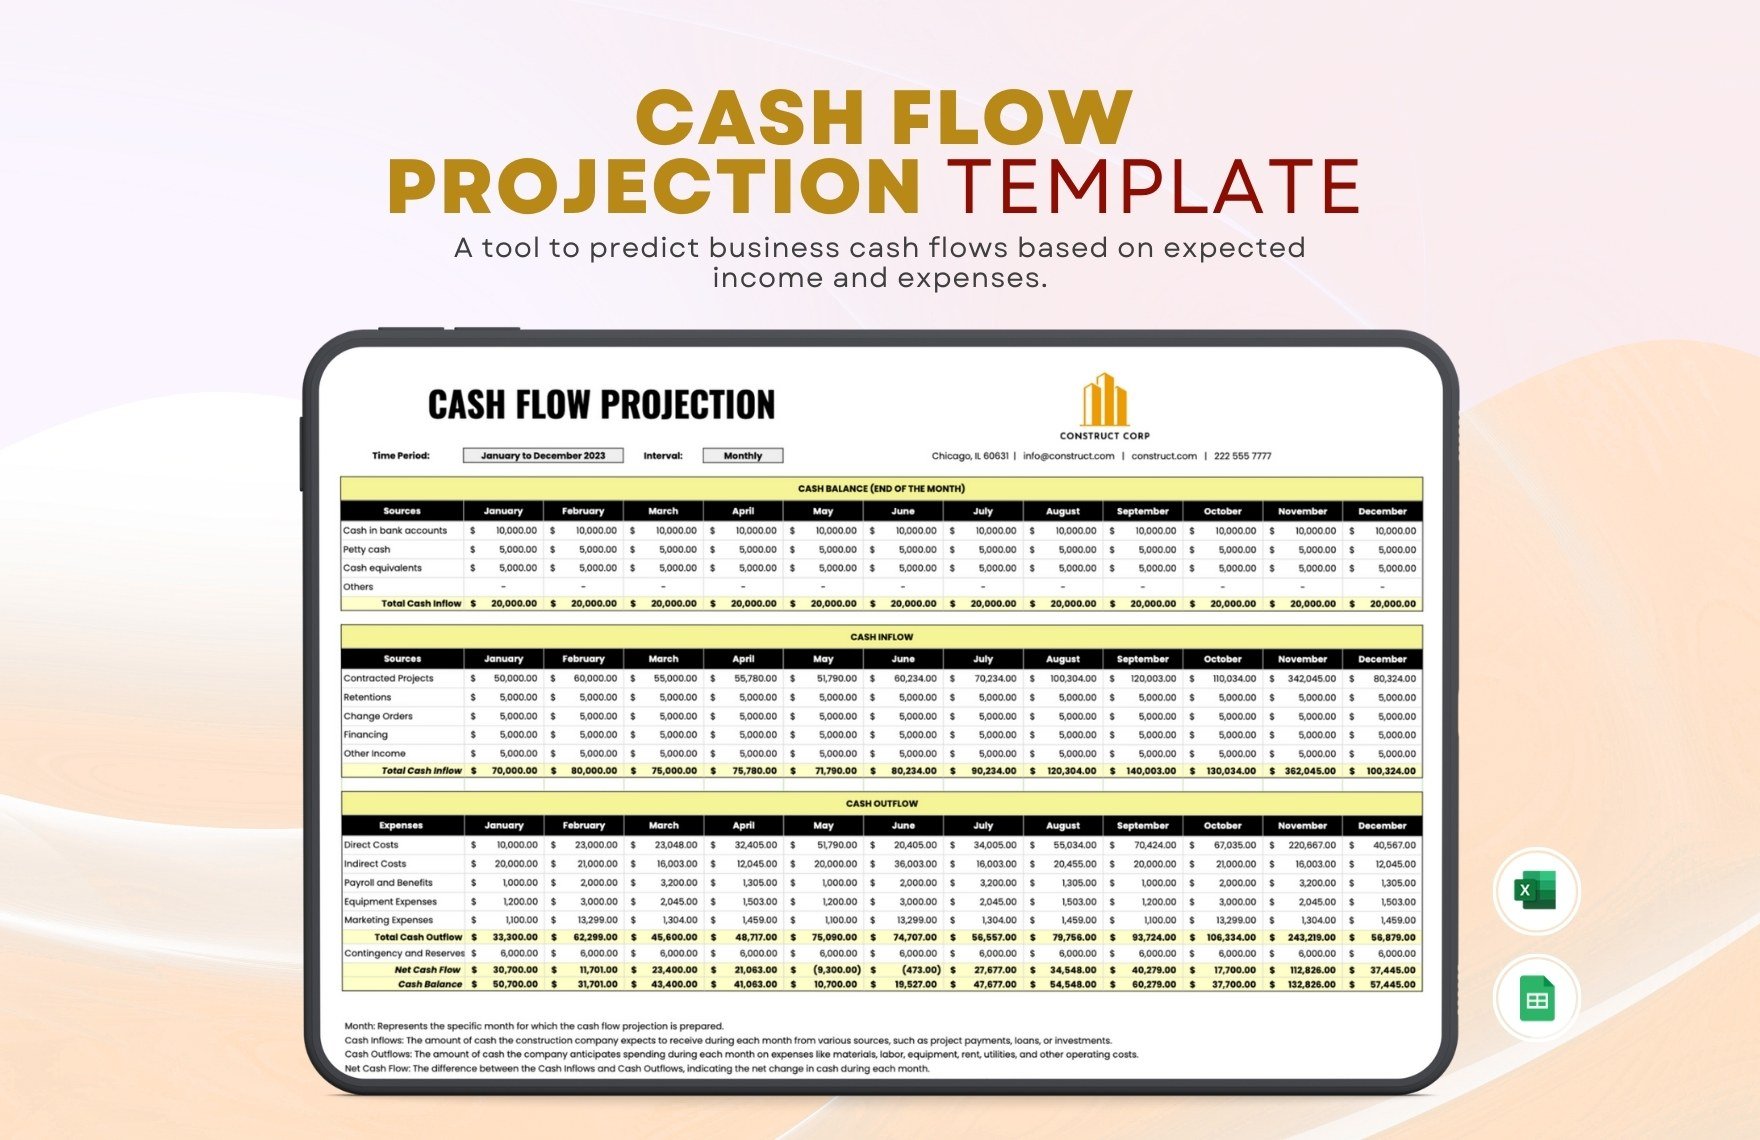 Cash Flow Projection Template in Excel, Google Sheets